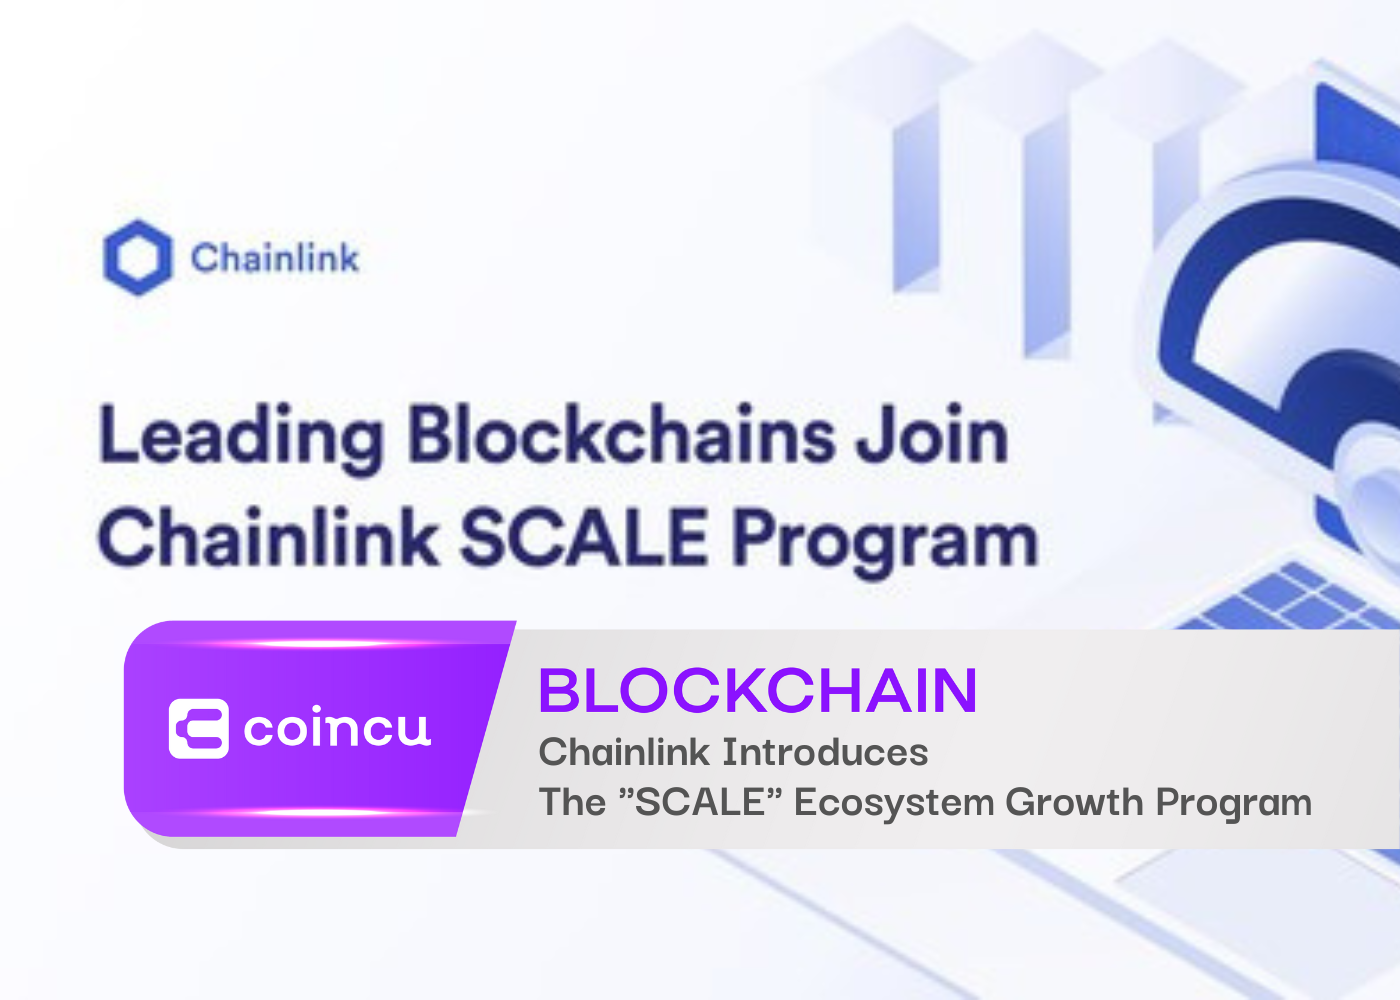 Chainlink Introduces